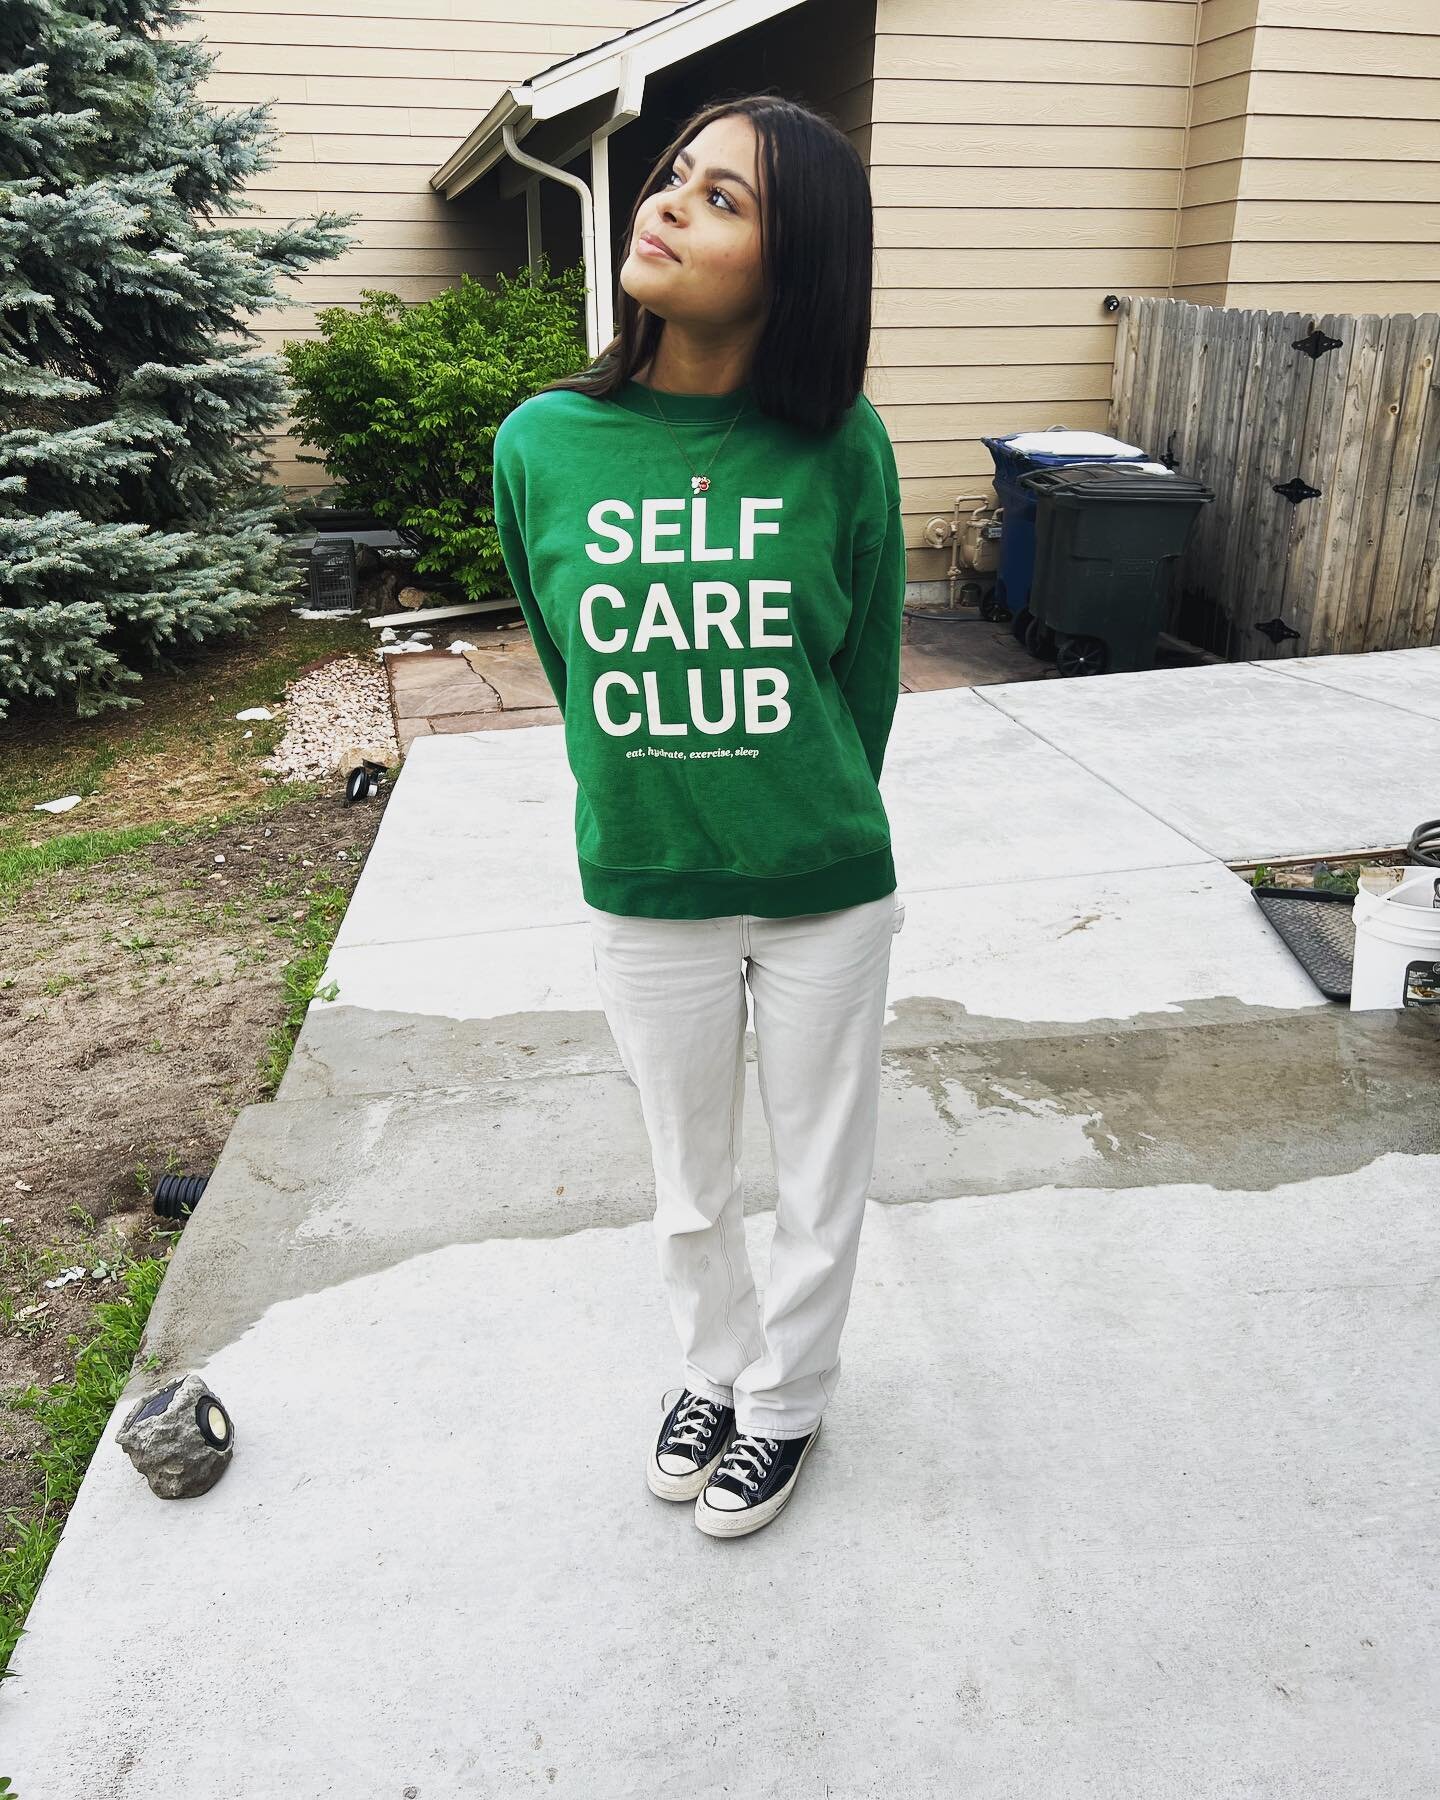 💚My niece wore this outfit earlier this week and my first thought was where do I get the same outfit? 
My second thought was the importance of mental health in our youth. She confirmed the hardships teens have faced since the pandemic hit. 
I was pr